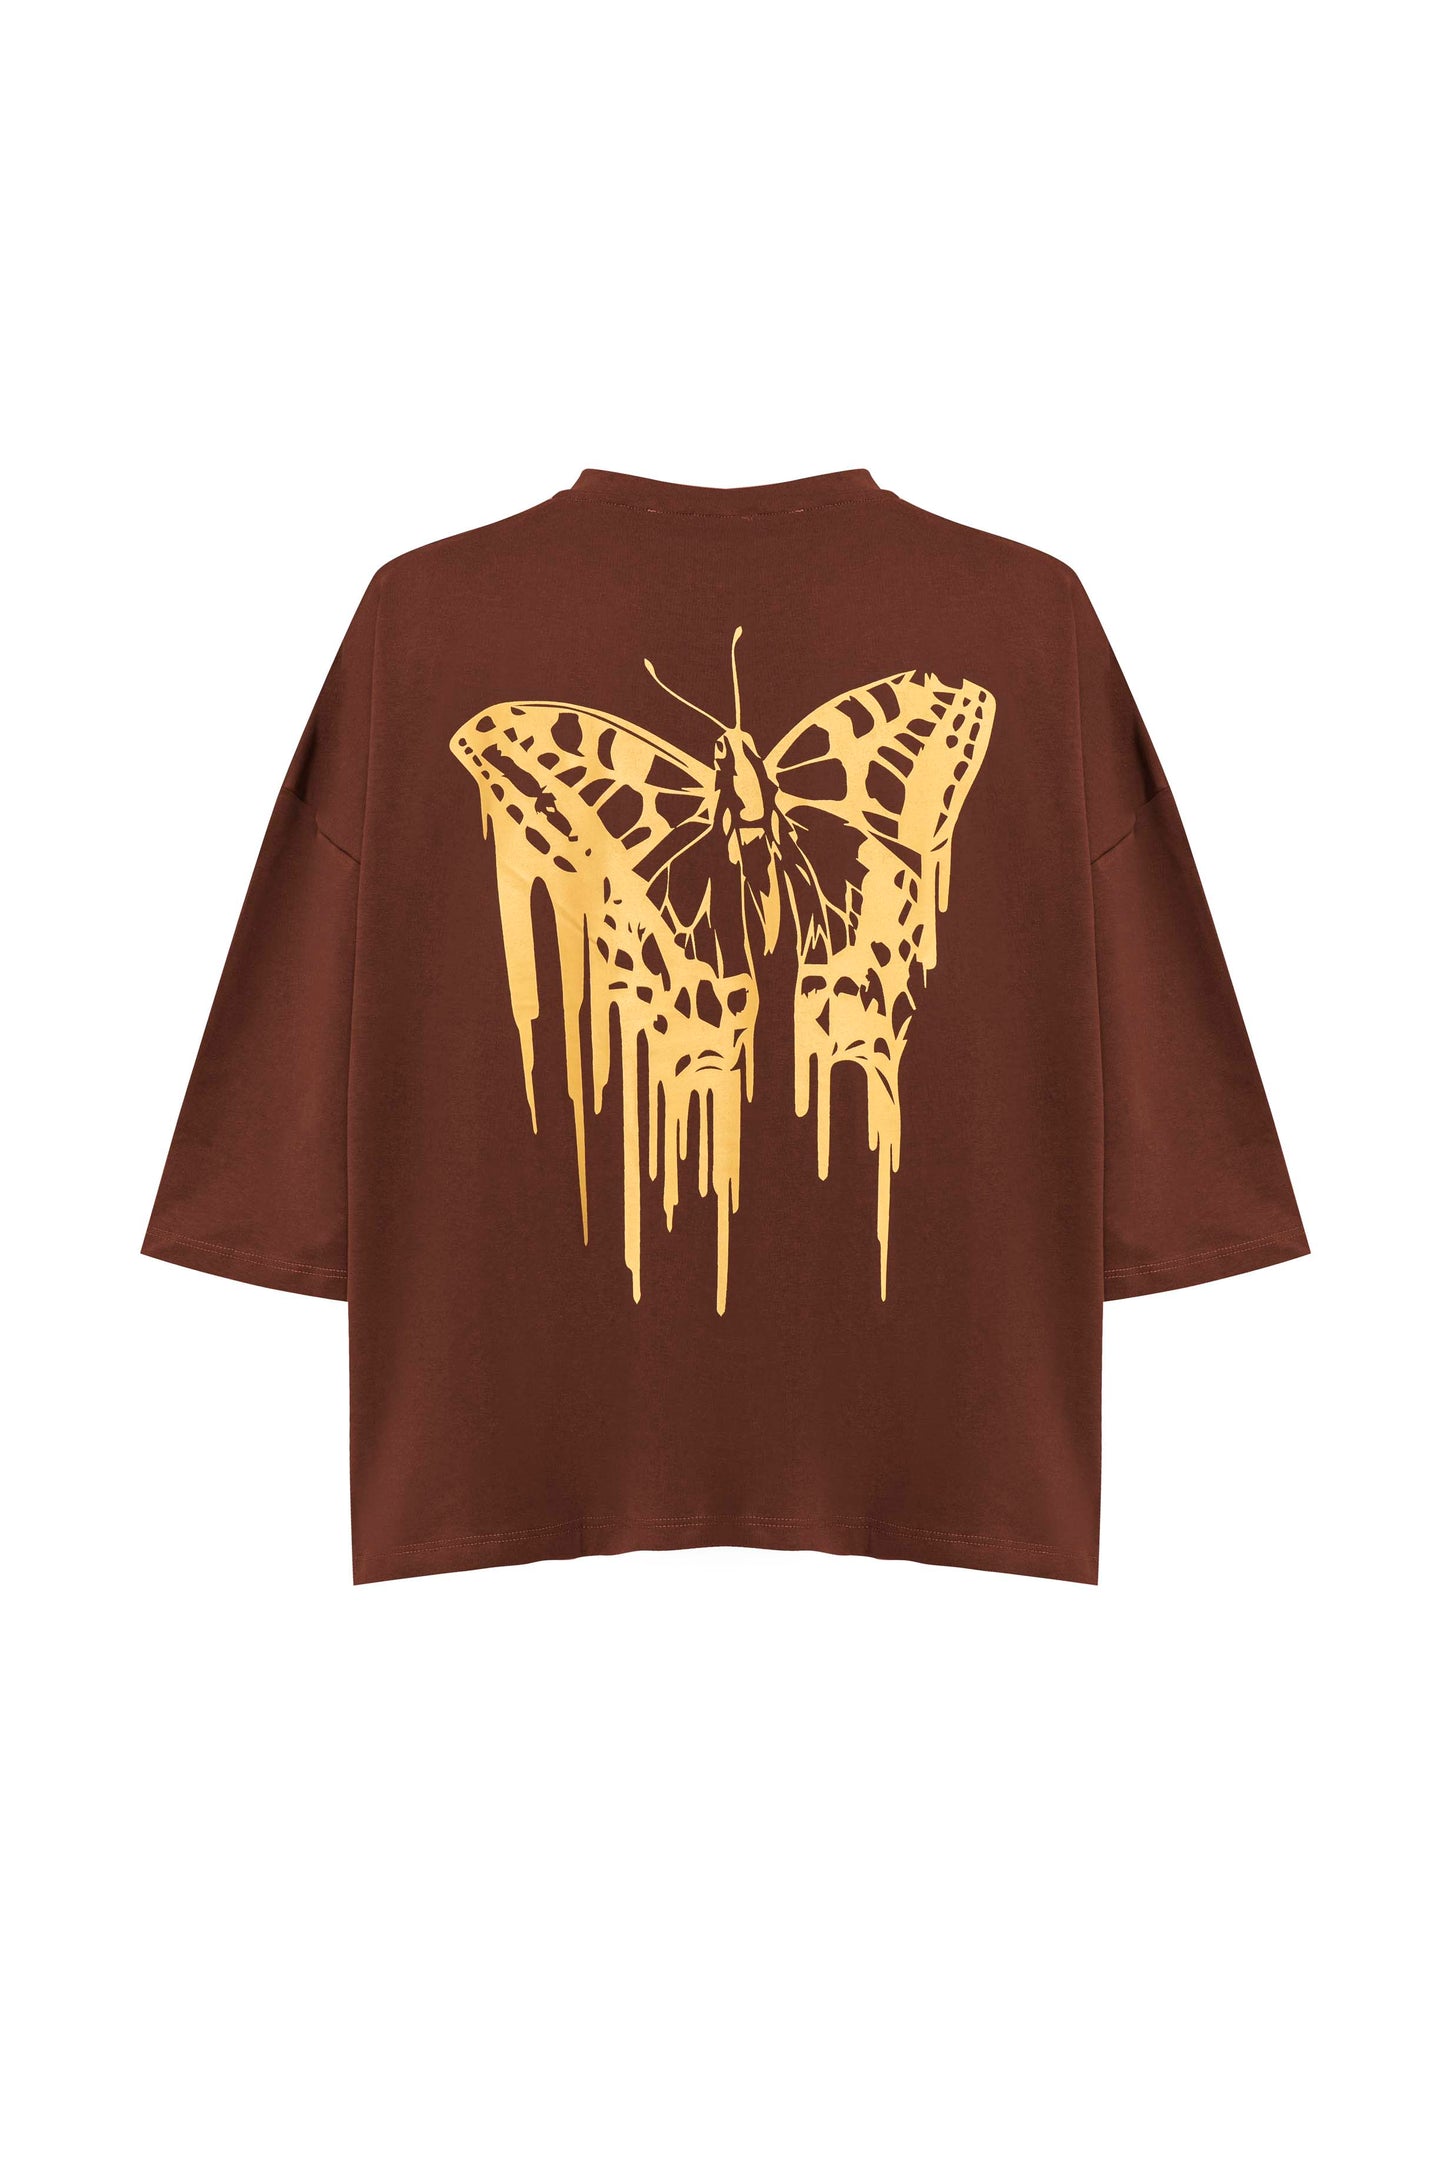 T-shirt Live Fast Brown